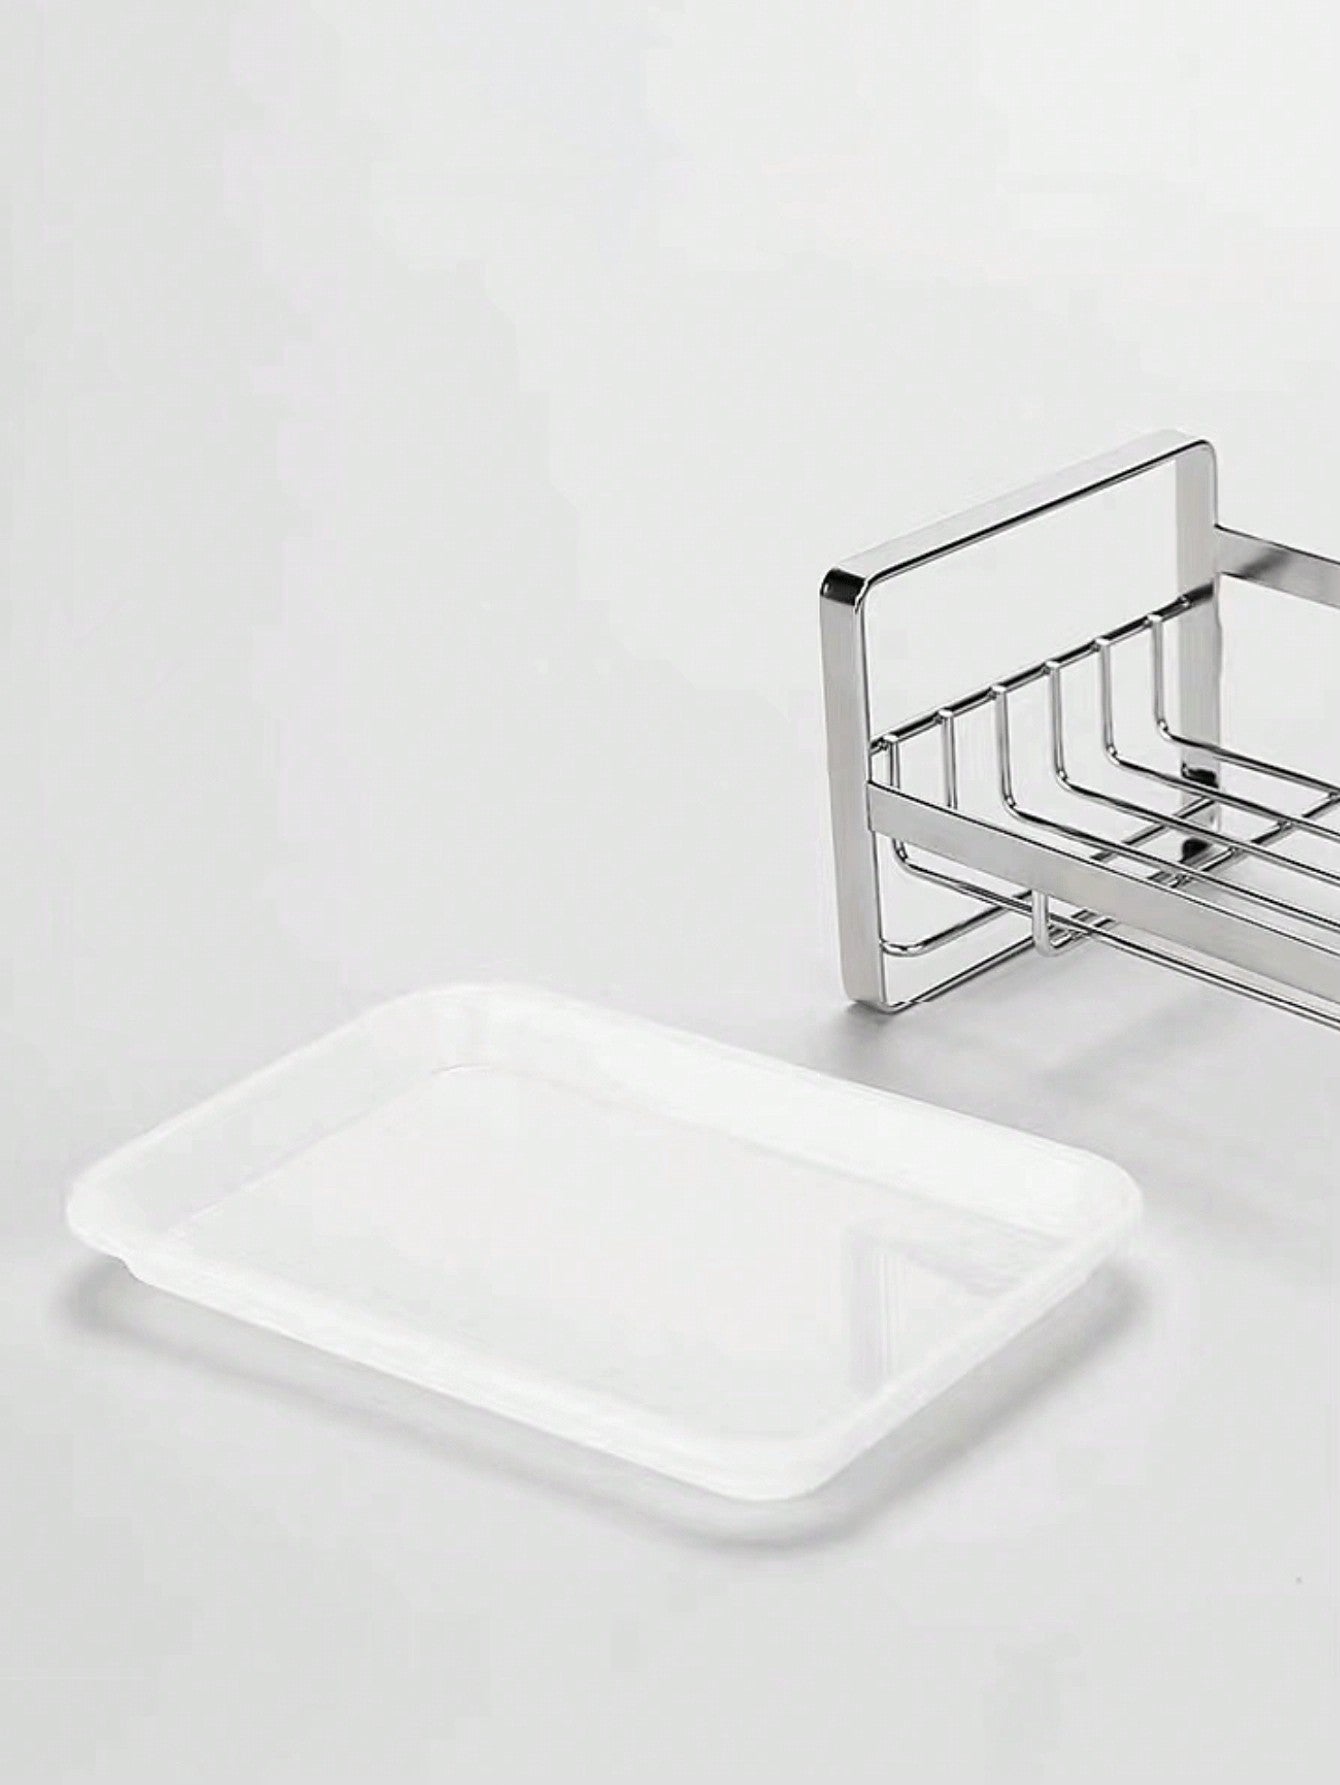 1pc Stainless Steel Sink Organizer Drying Rack, Hanging Sponge Holder,  Faucet Storage Rack with Plastic Tray